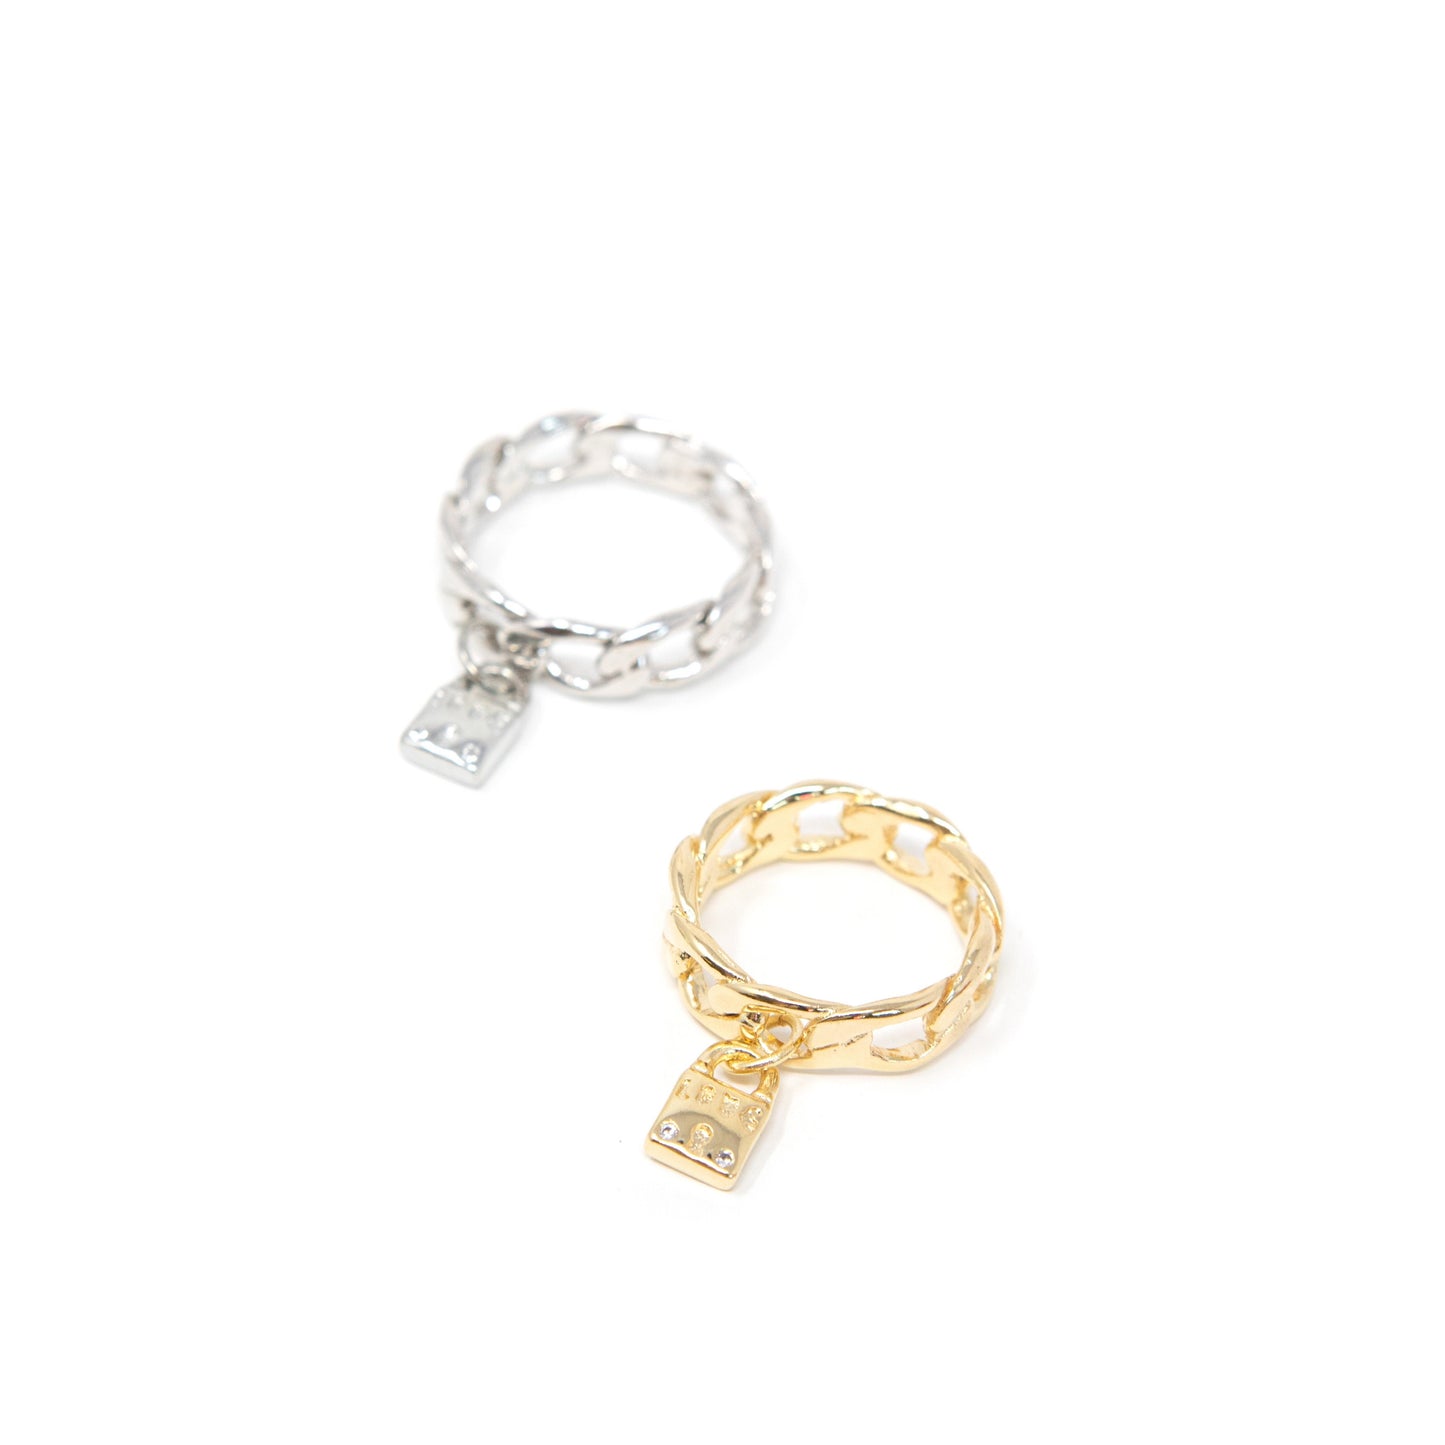 Chain Link Rings with Lock Charms ACCESSORY The Sis Kiss